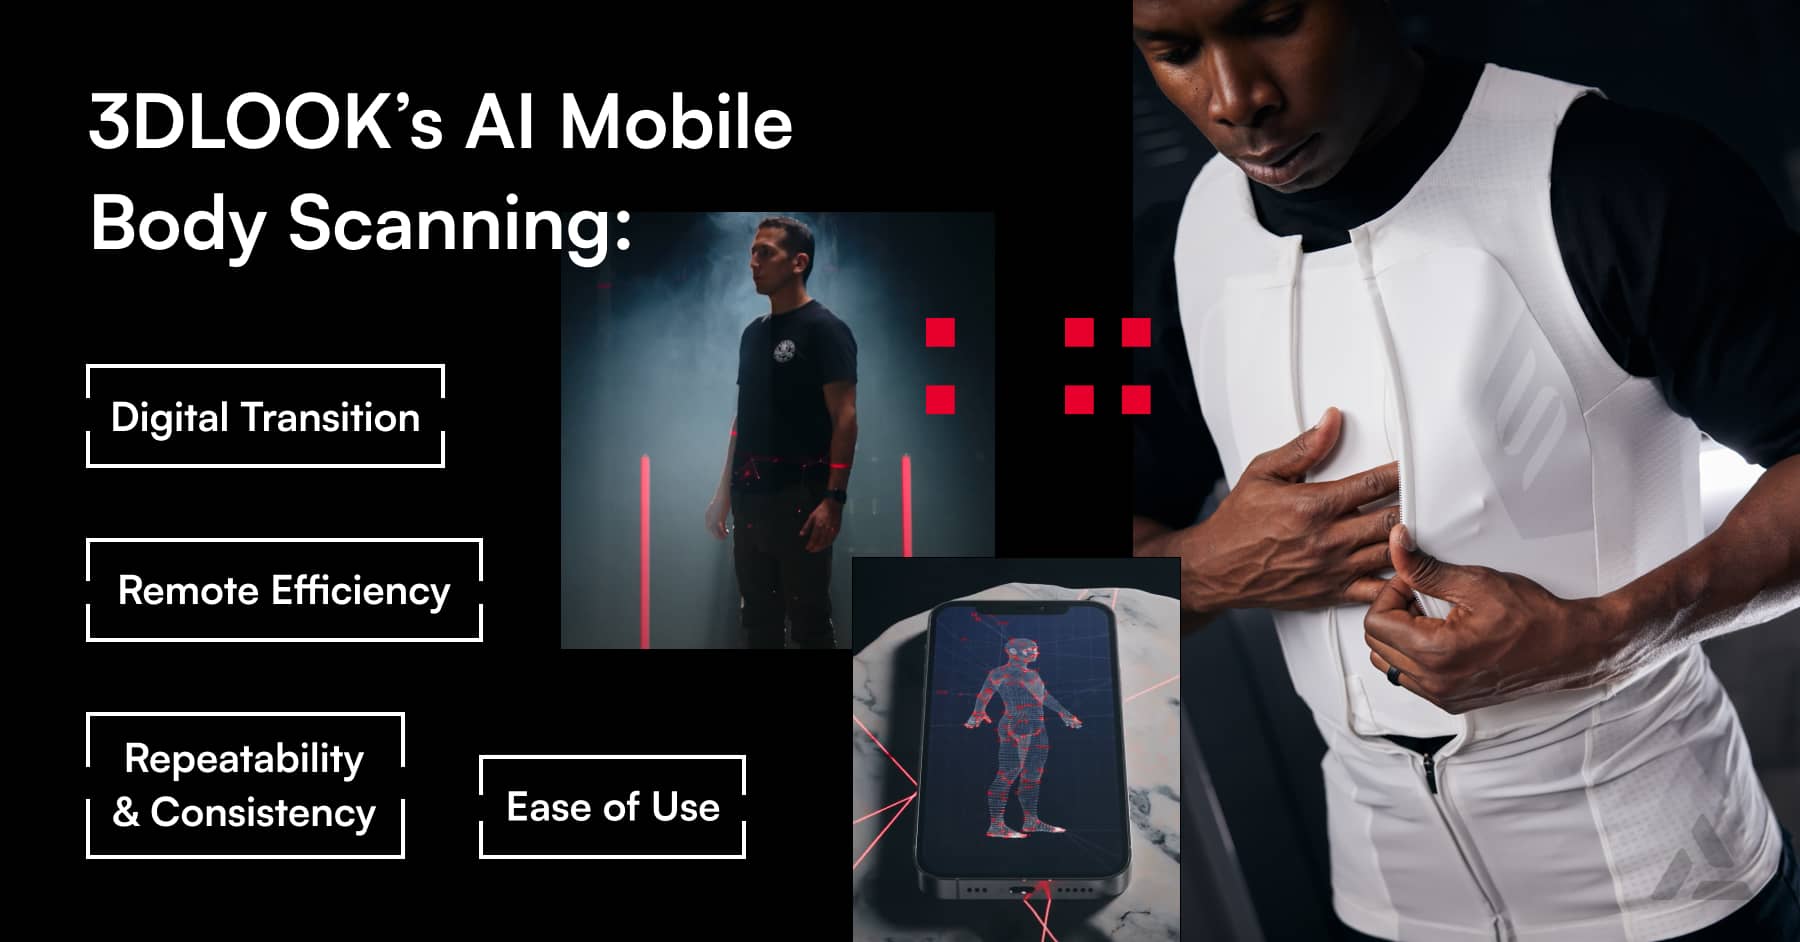 Promotional material showcasing 3DLook's AI-powered body scanning technology features for digital transition, remote efficiency, repeatability, consistency, and ease of use, with a person using the application on